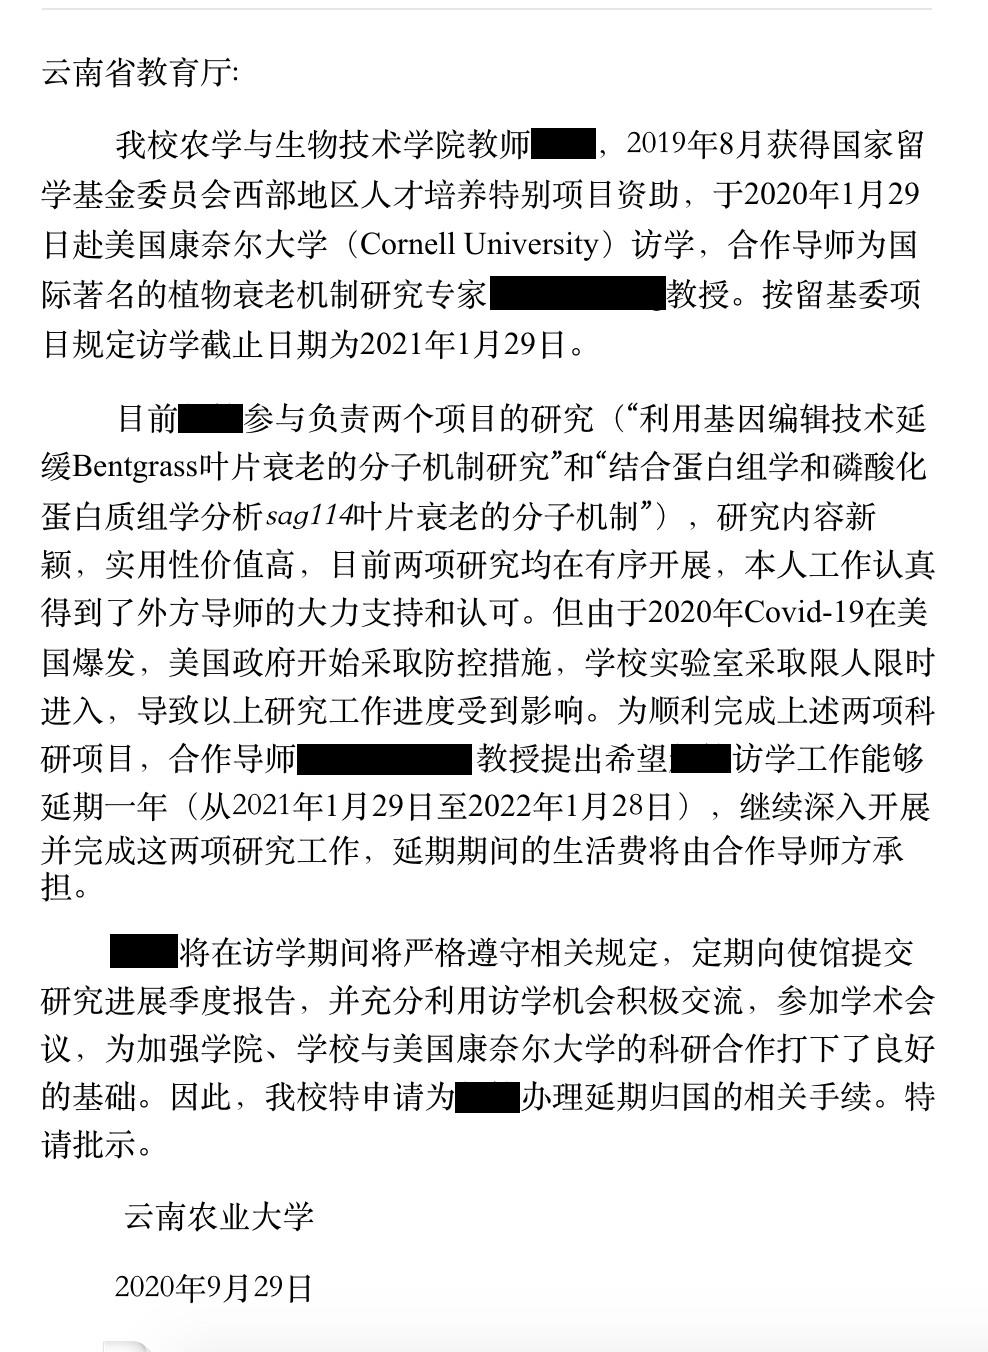 A screenshot of the letter from Yunnan Agricultural University on Sept. 29, 2020. (Provided to The Epoch Times)